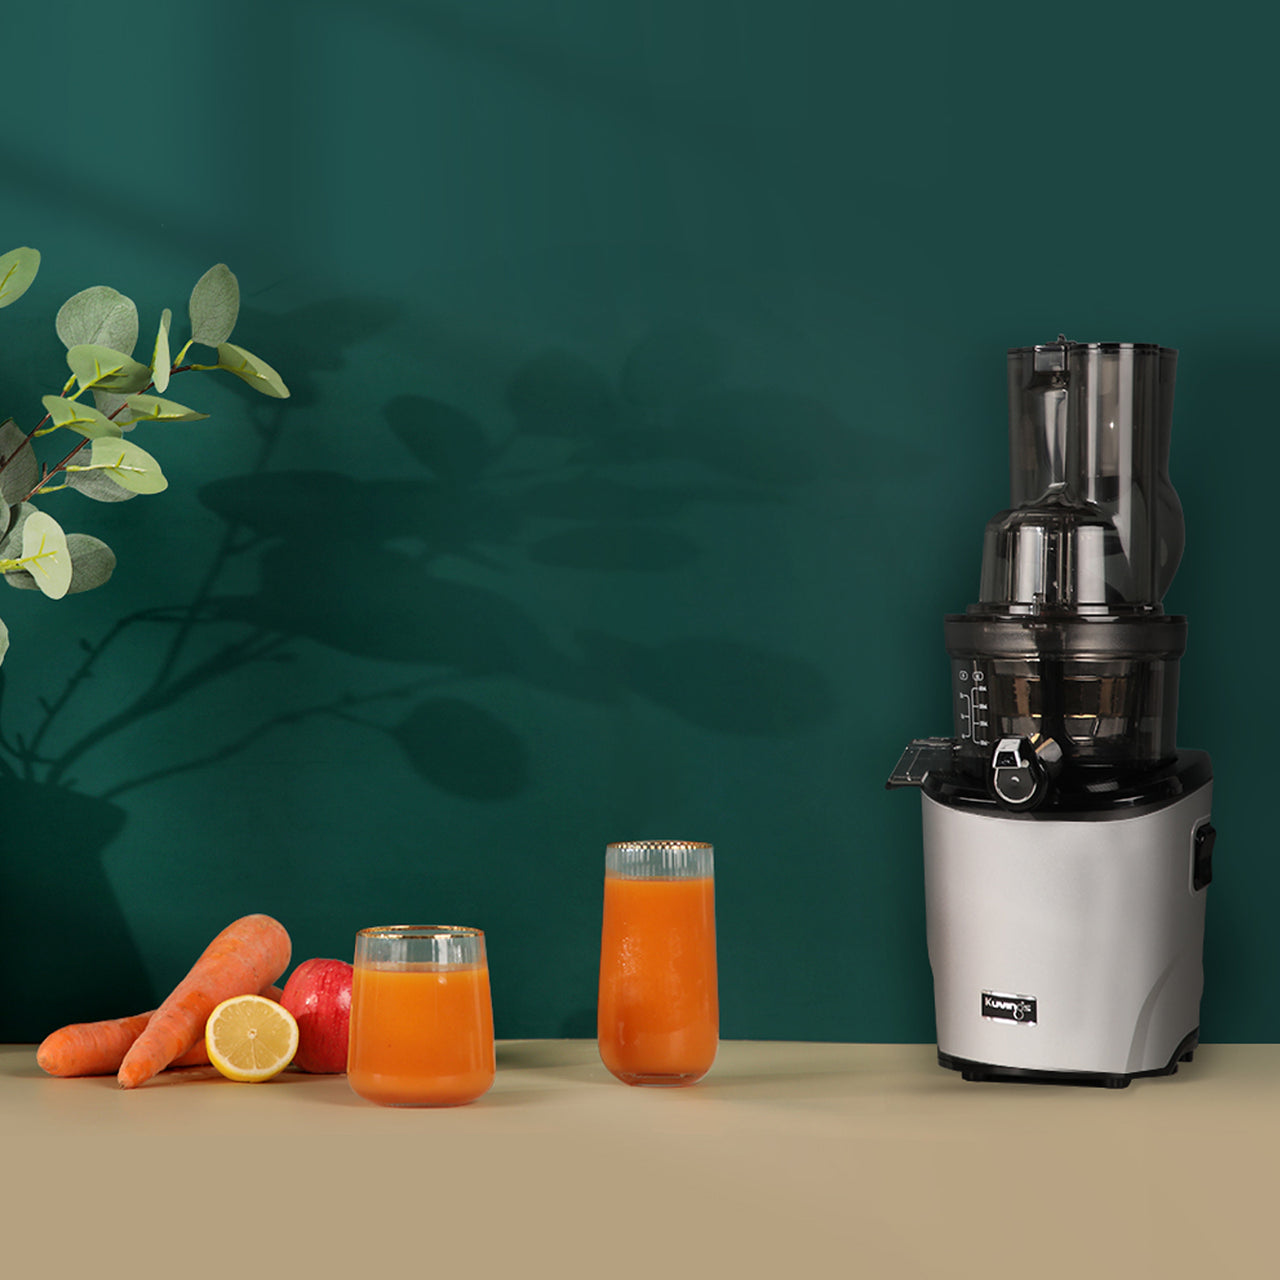 Kuvings REVO830 vs Kuvings EVO820 Cold Press Juicer Review Comparison 